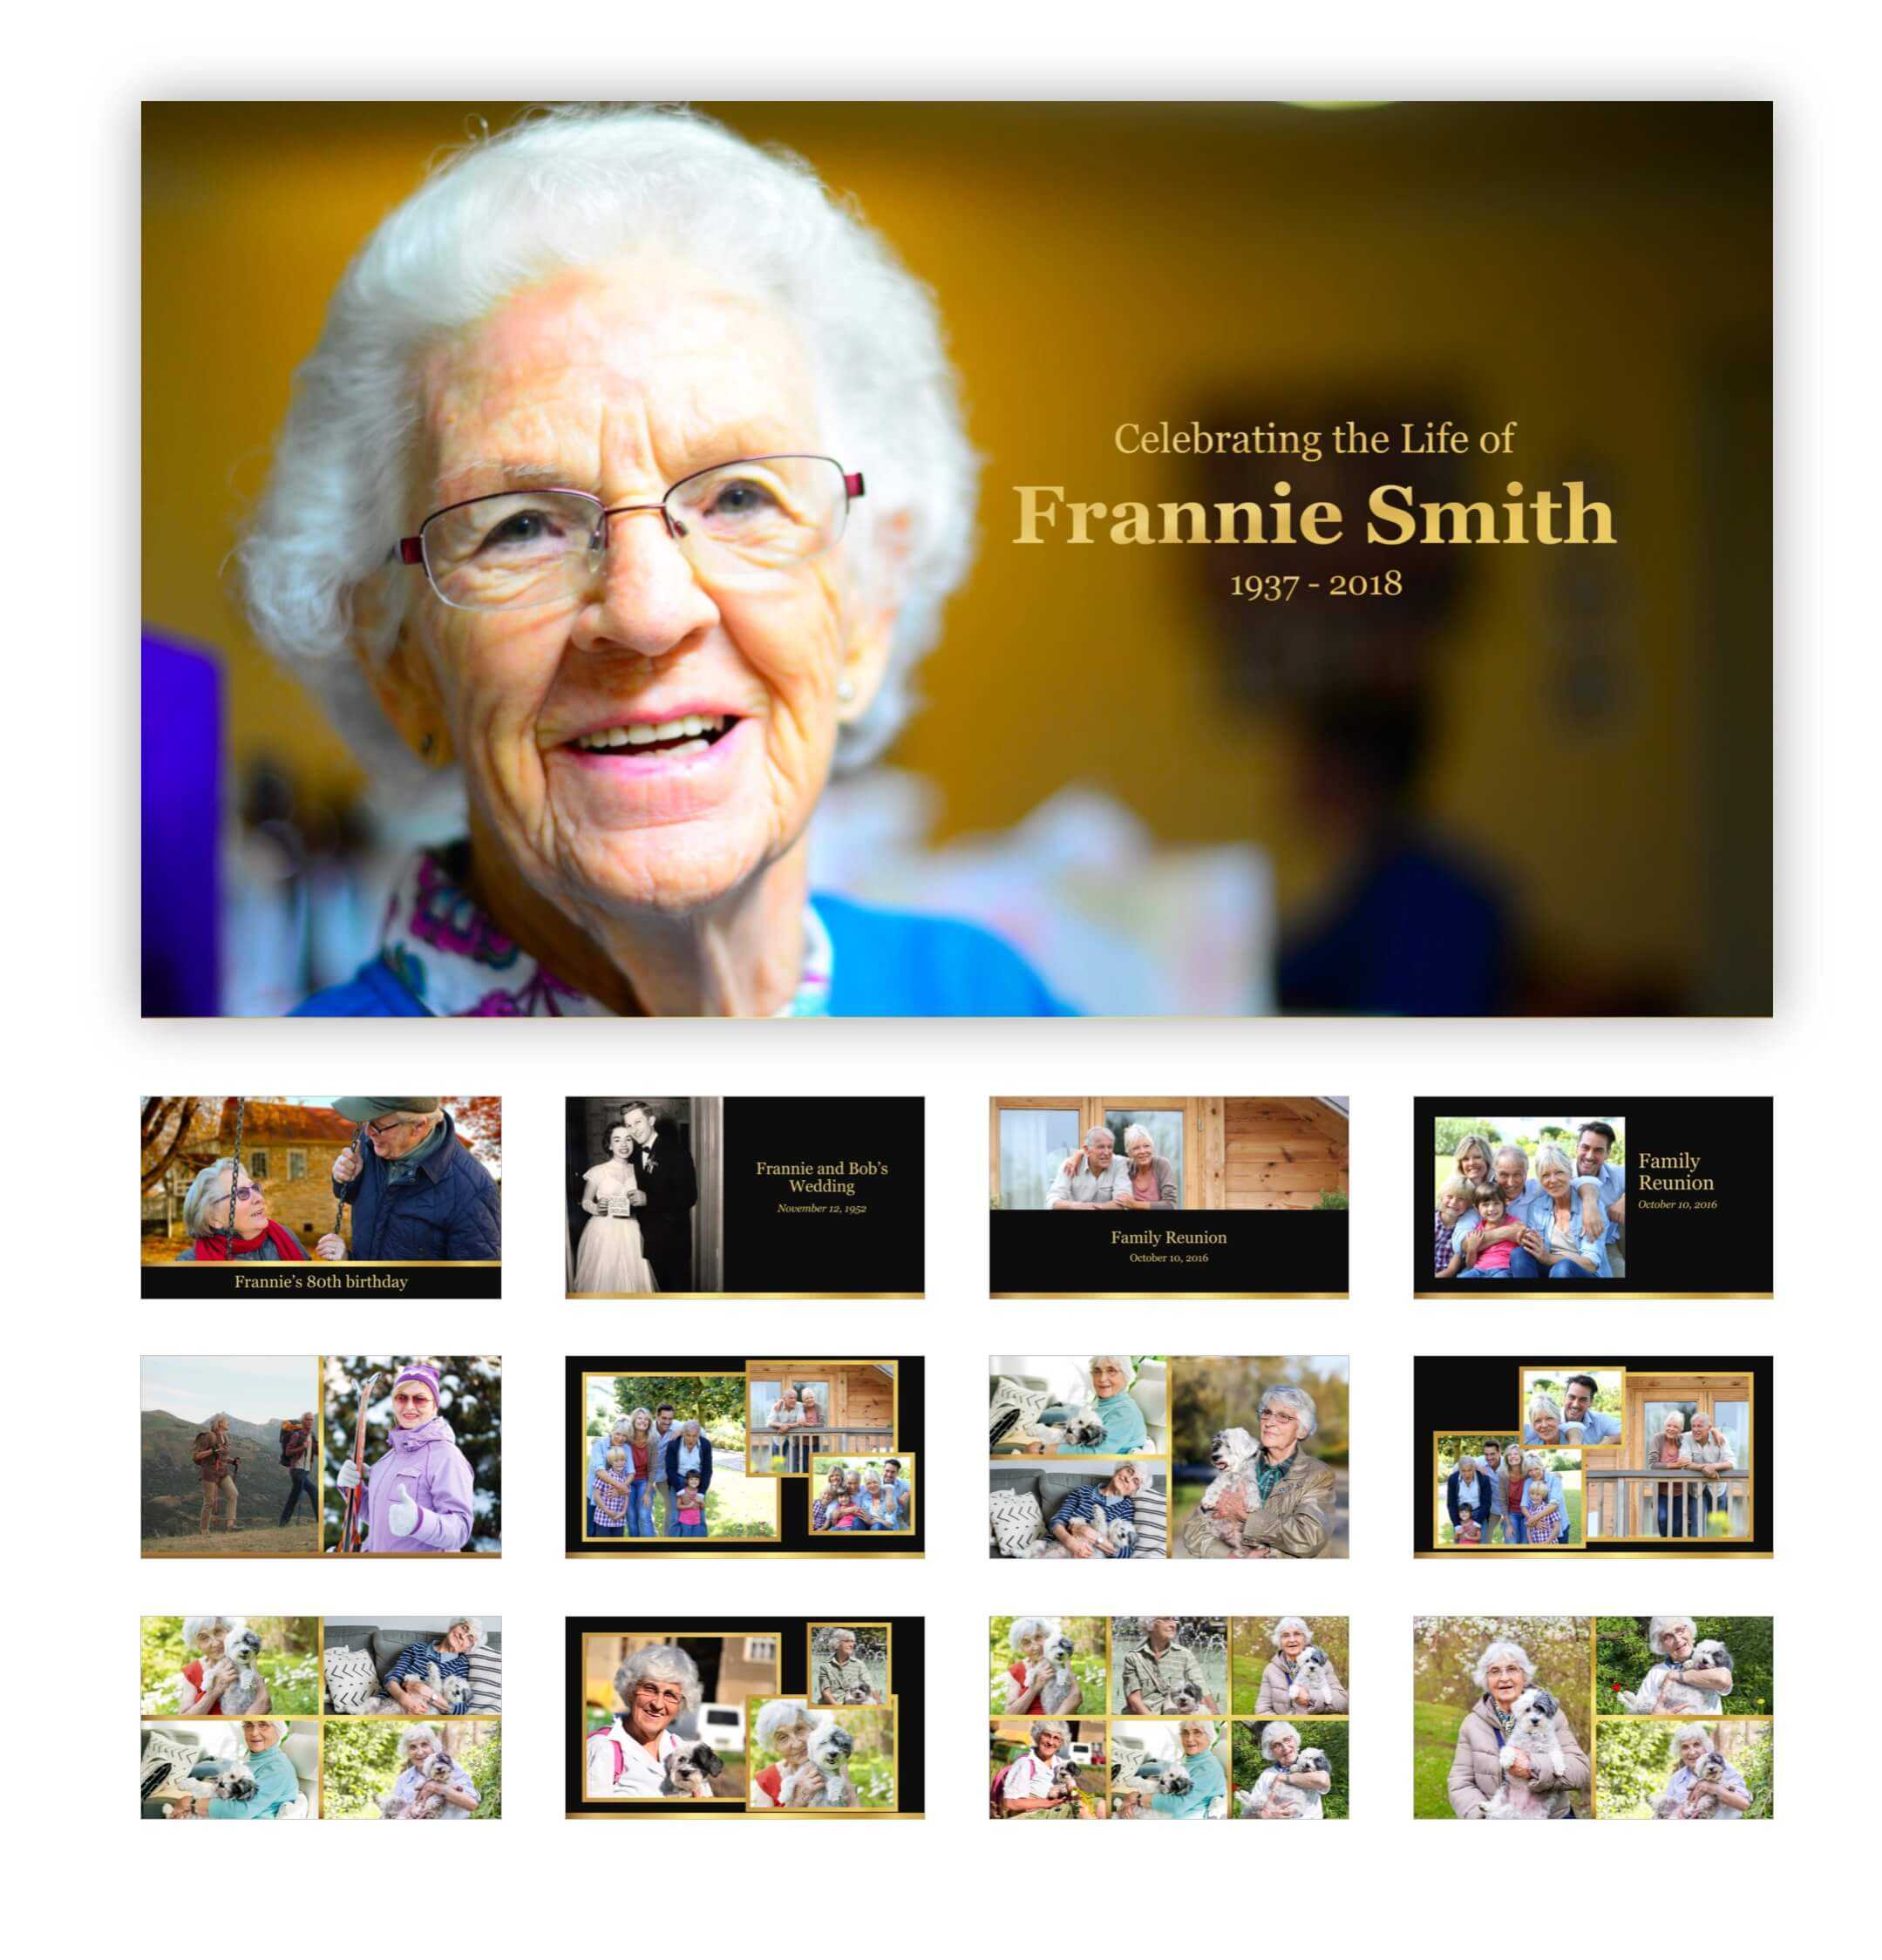 Best Funeral Powerpoint Templates Of 2019 | Adrienne Johnston With Regard To Funeral Powerpoint Templates